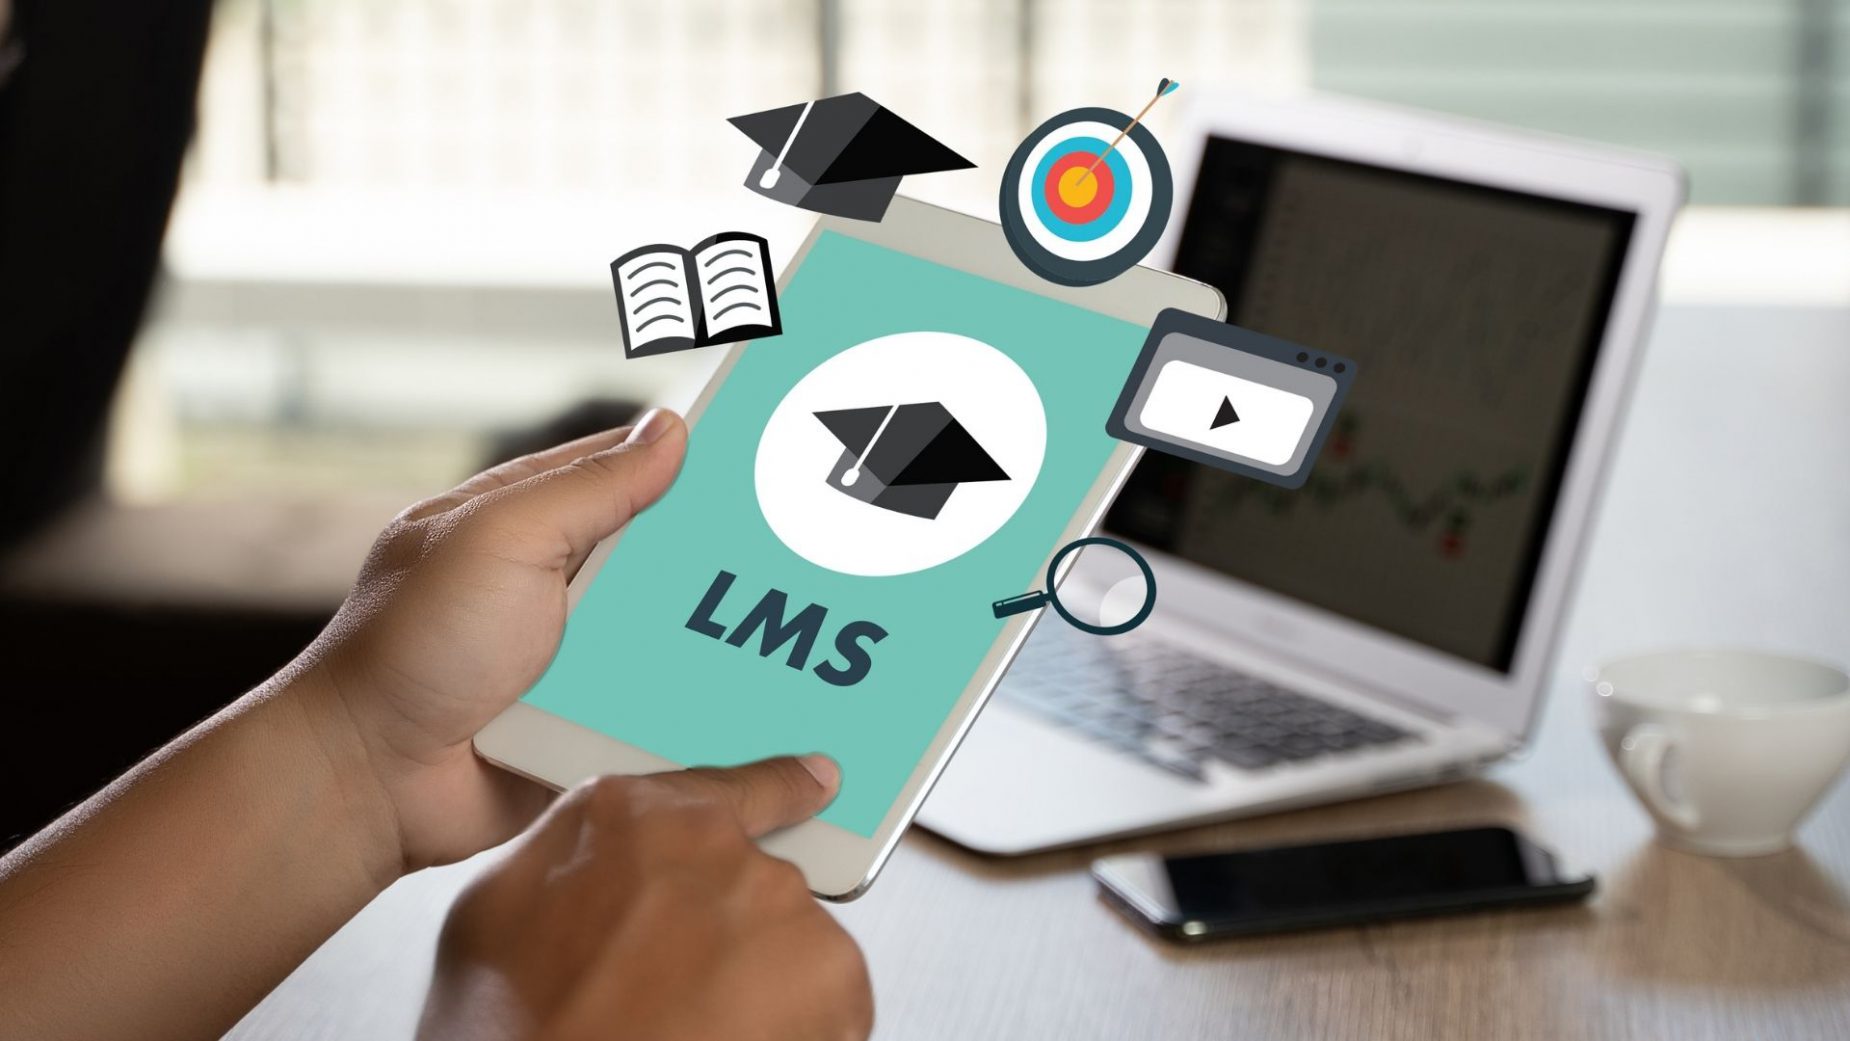 Global Learning Management System (LMS) Market Overview And Prospects